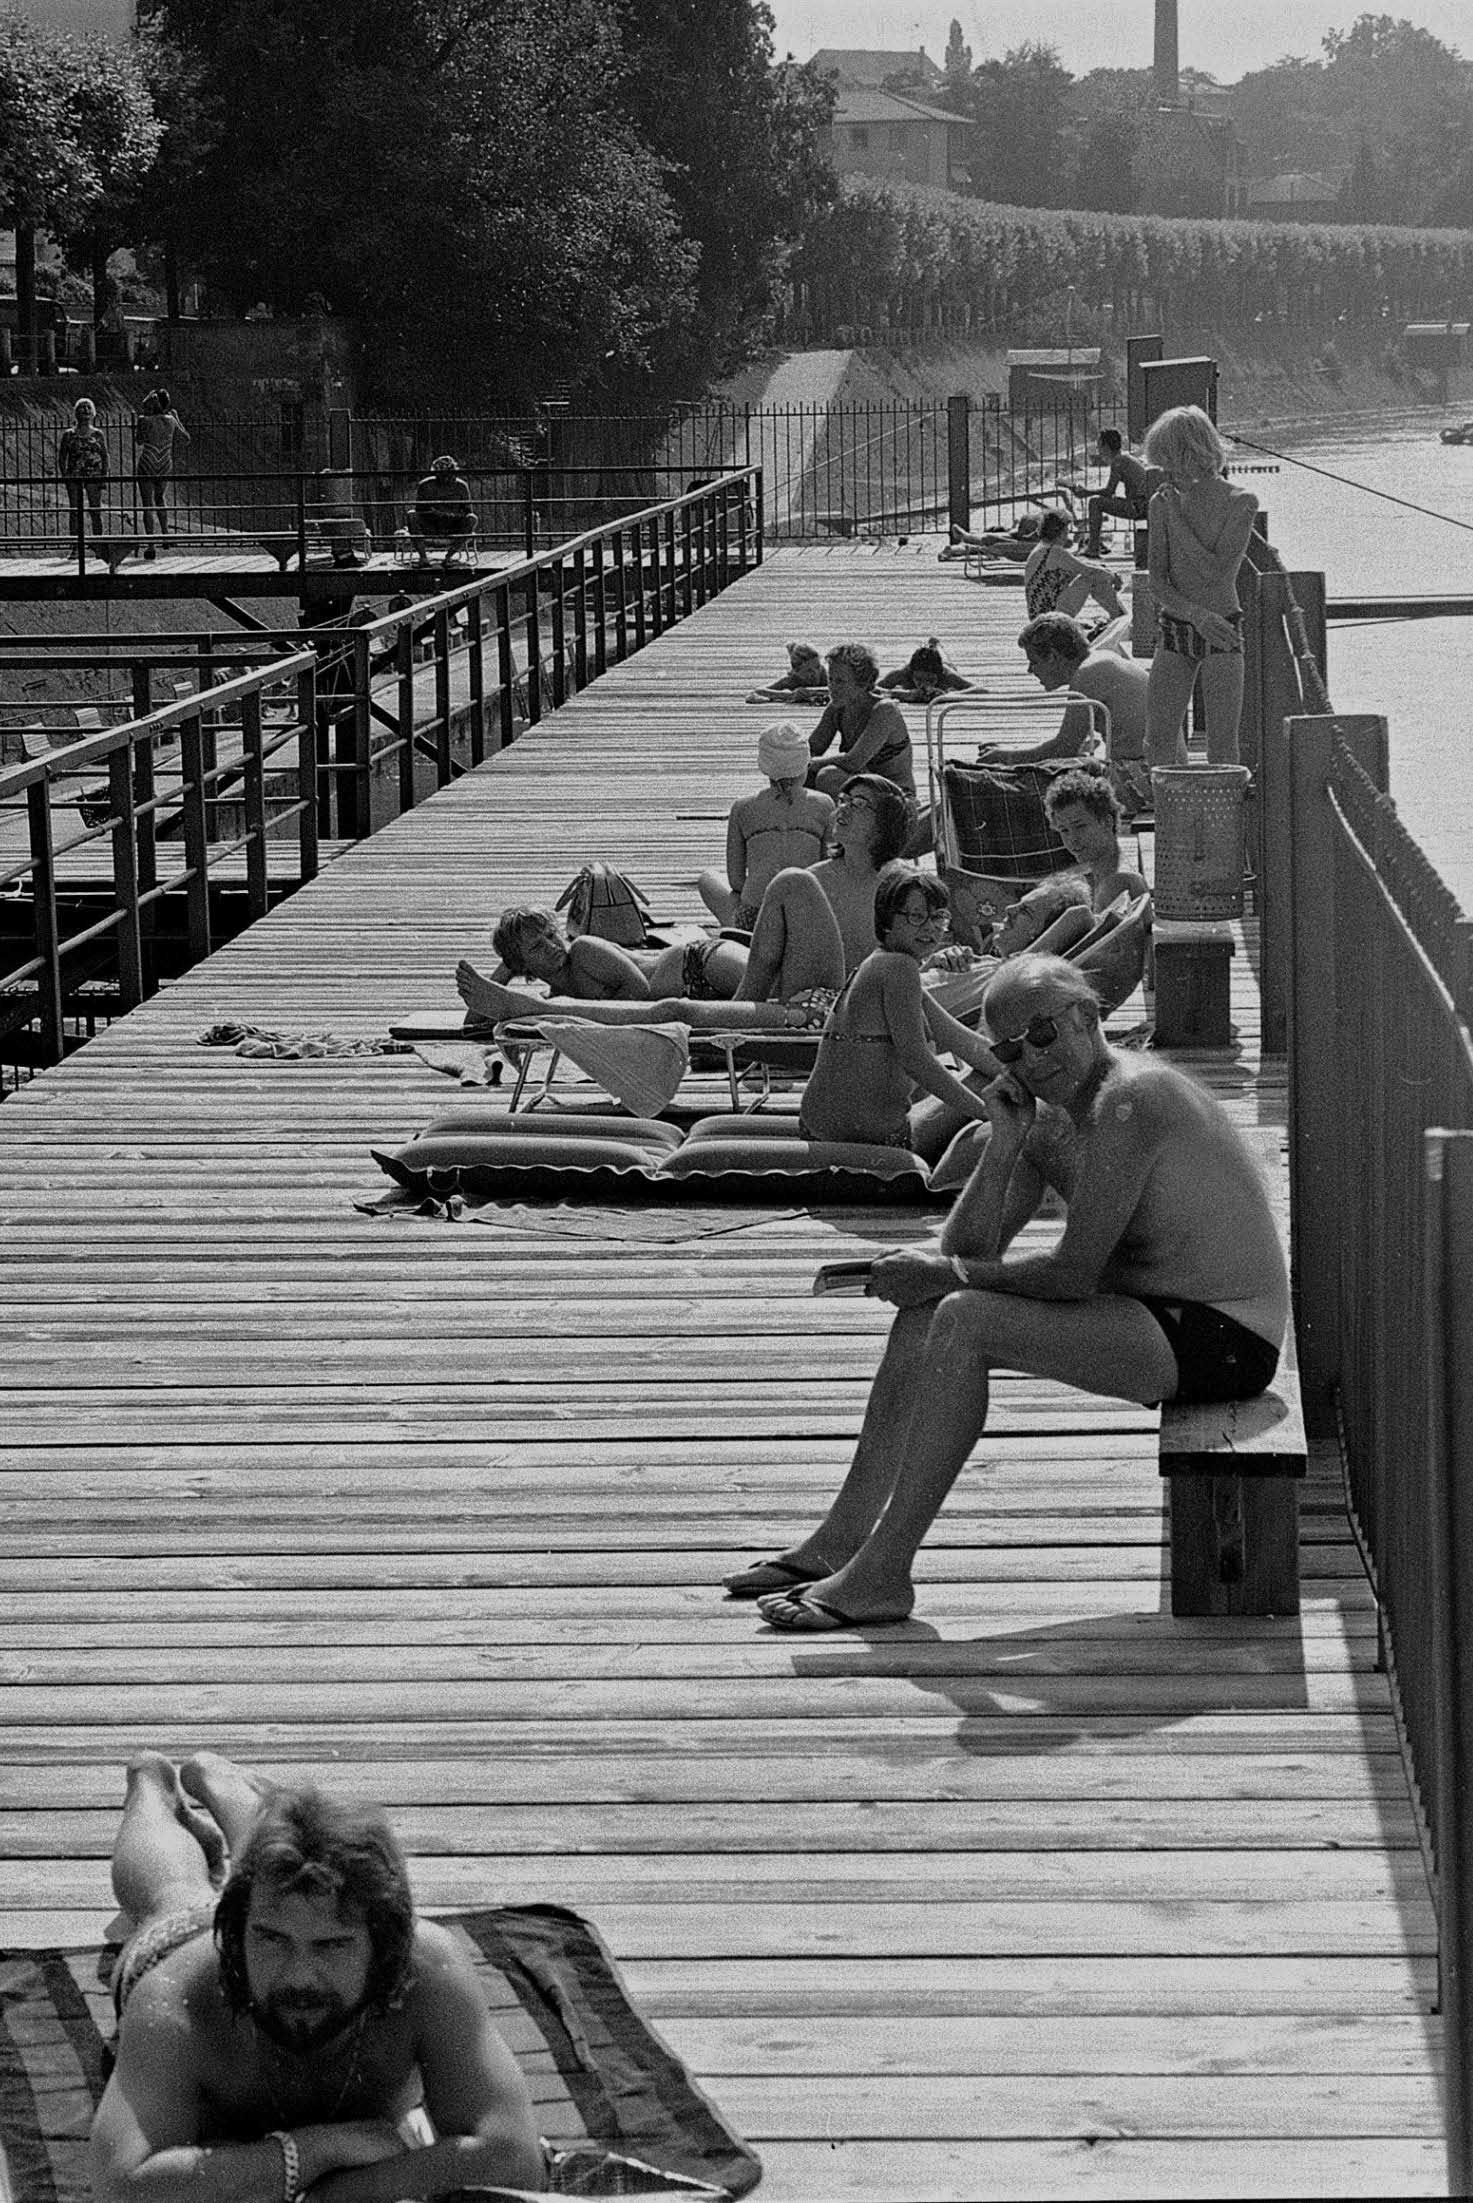 Basel’s two historical bathing areas are local meeting points and a popular choice for peaceful sunbathing, s.d. © StABS, Basel